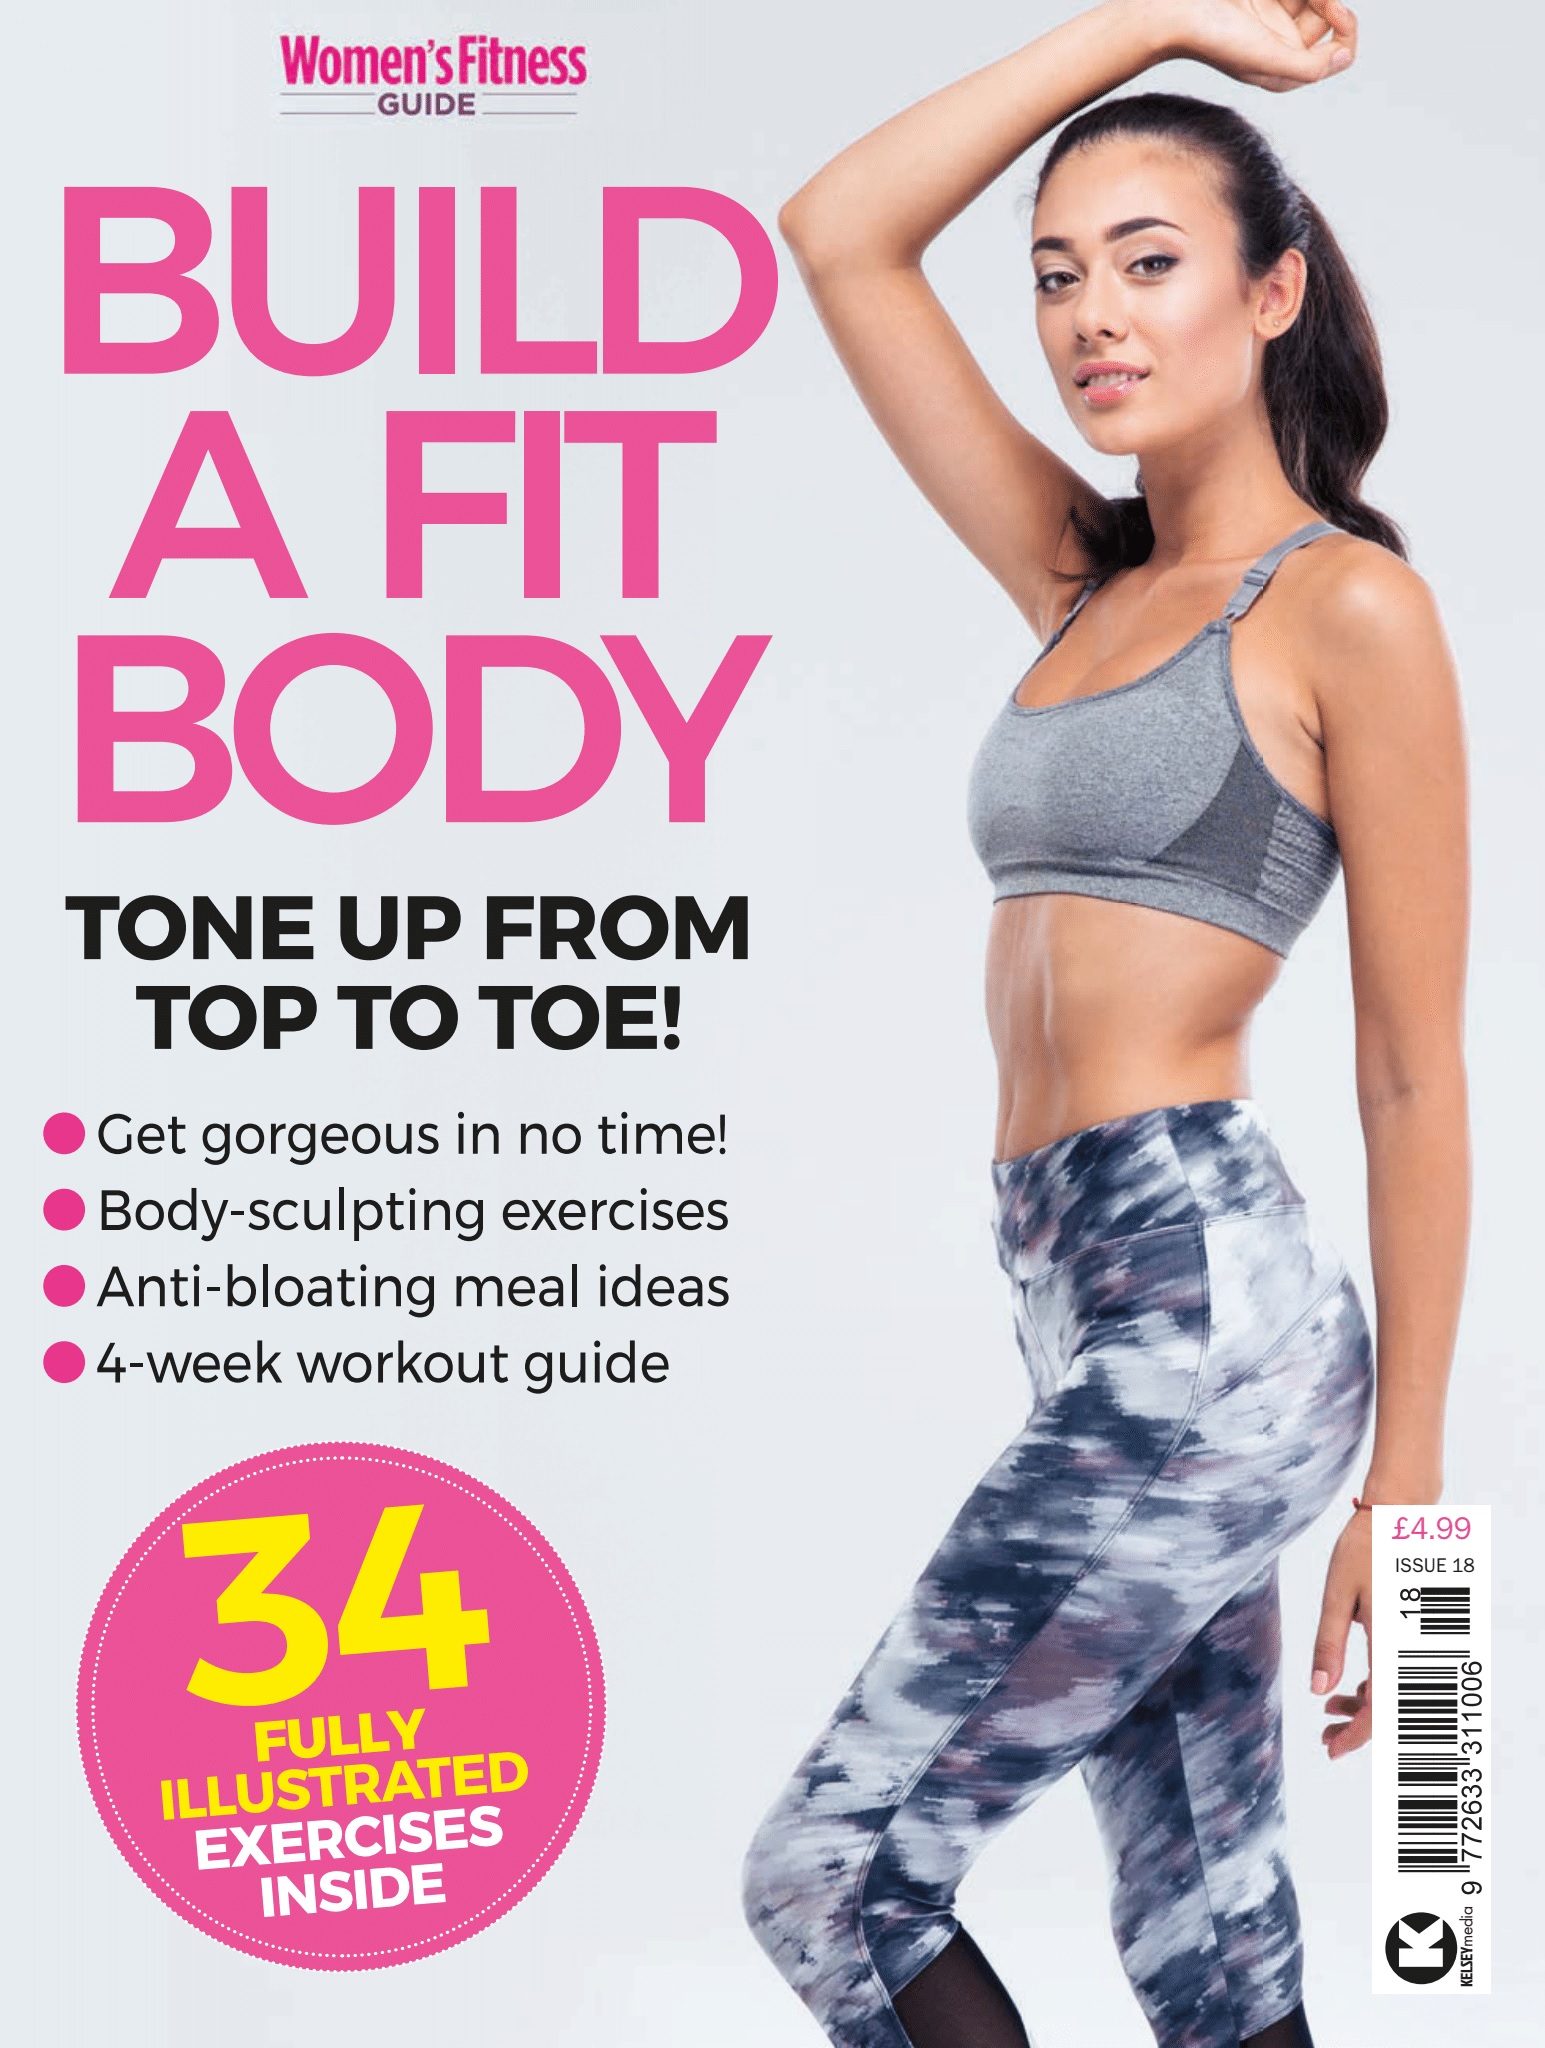 Women's Fitness Guide #18 - Build a Fit Body